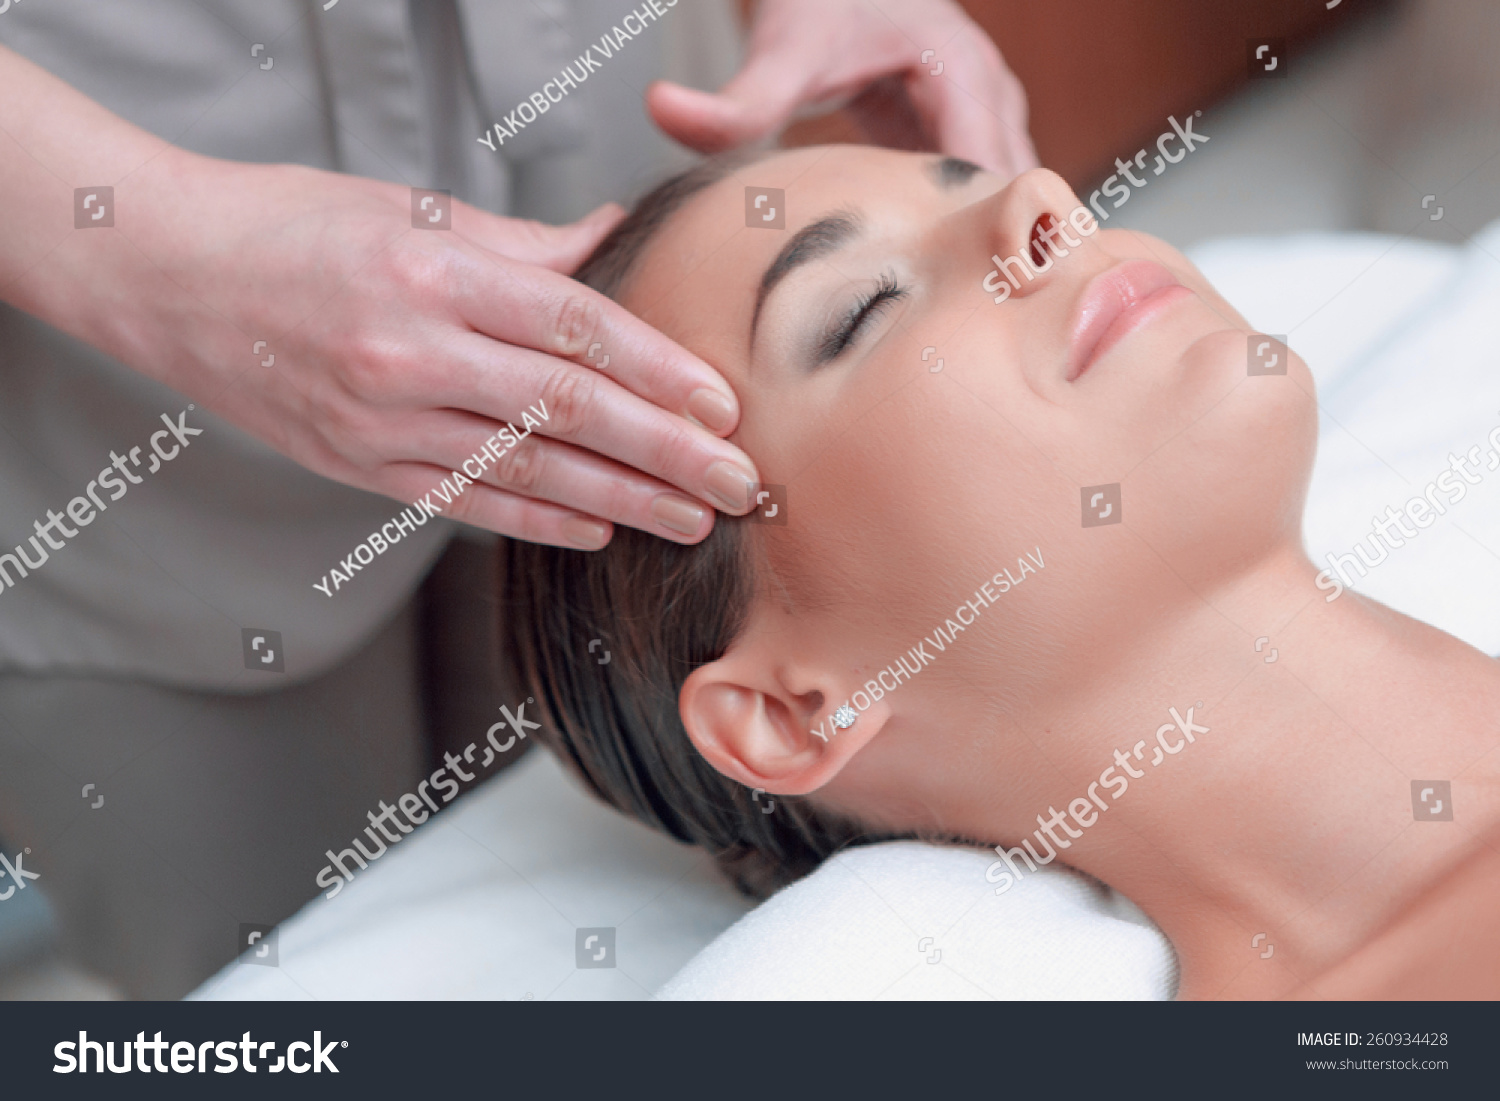 Facial massage. Top view of attractive young woman lying on back and keeping her eyes closed while massage therapist massaging her face #260934428